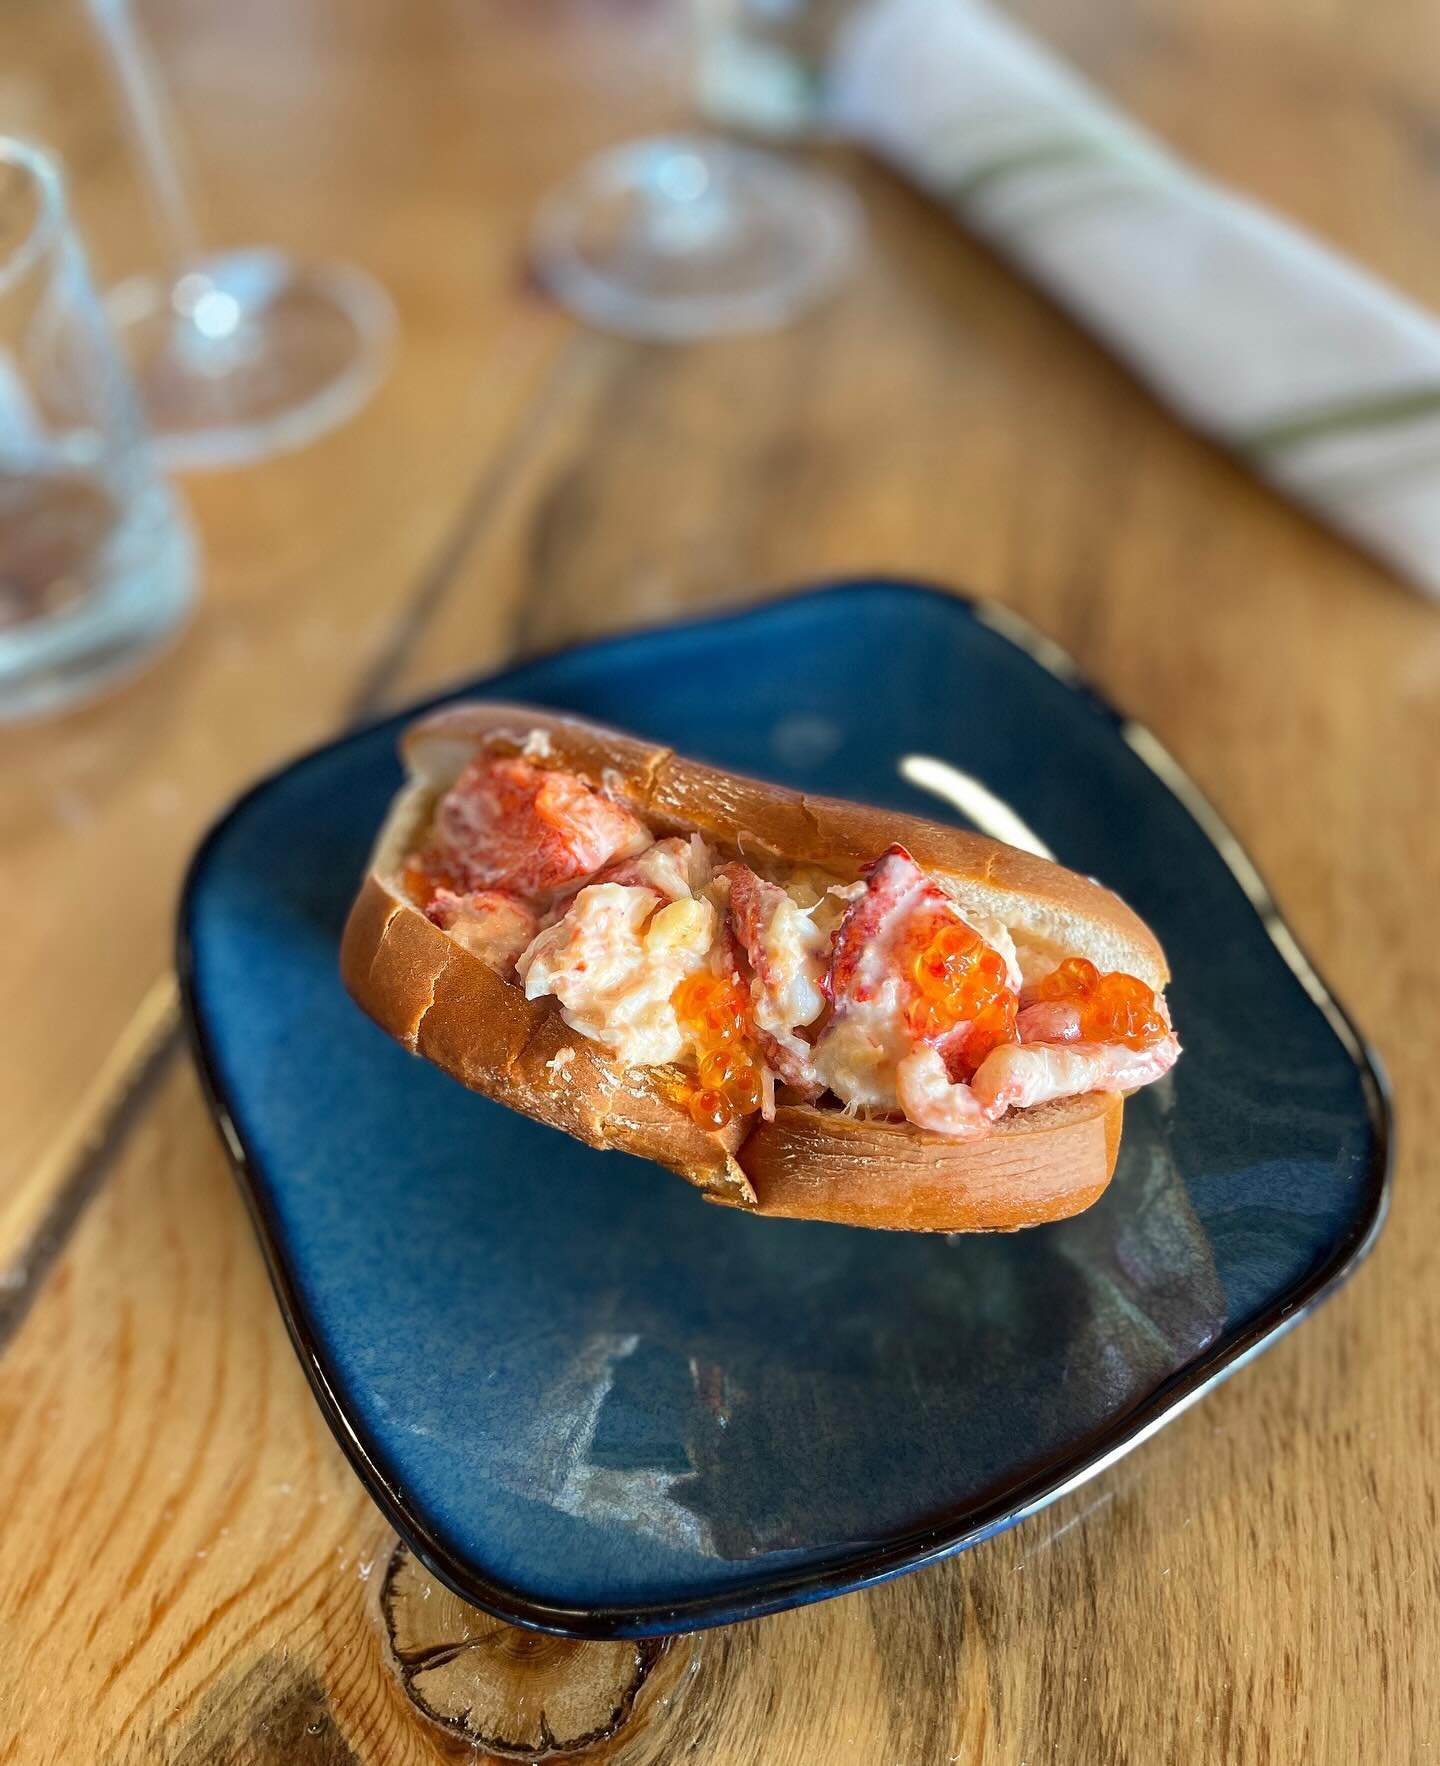 ☀️We are back from break! The patio is officially open, and we have some fun new menu items to share with you! Here&rsquo;s a sneak peek&hellip;🦞

Maine Lobster Roll&bull;toasted split top roll&bull;brown butter mayo&bull;blis smoked steelhead roe&b